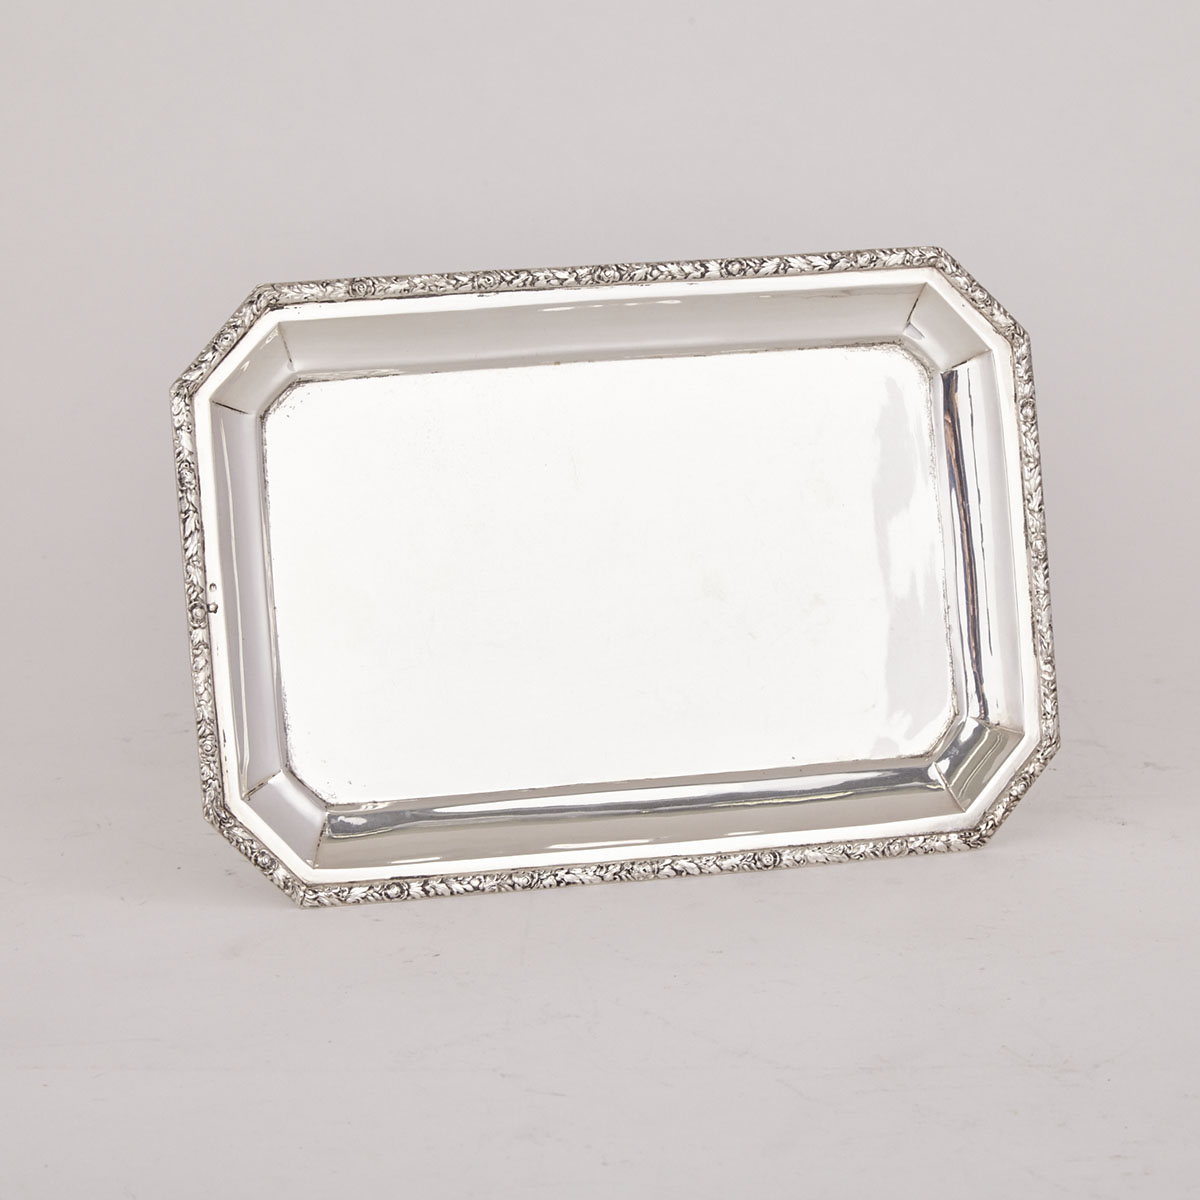 Austro-Hungarian Silver Oblong Small Tray, Prague, early 20th century